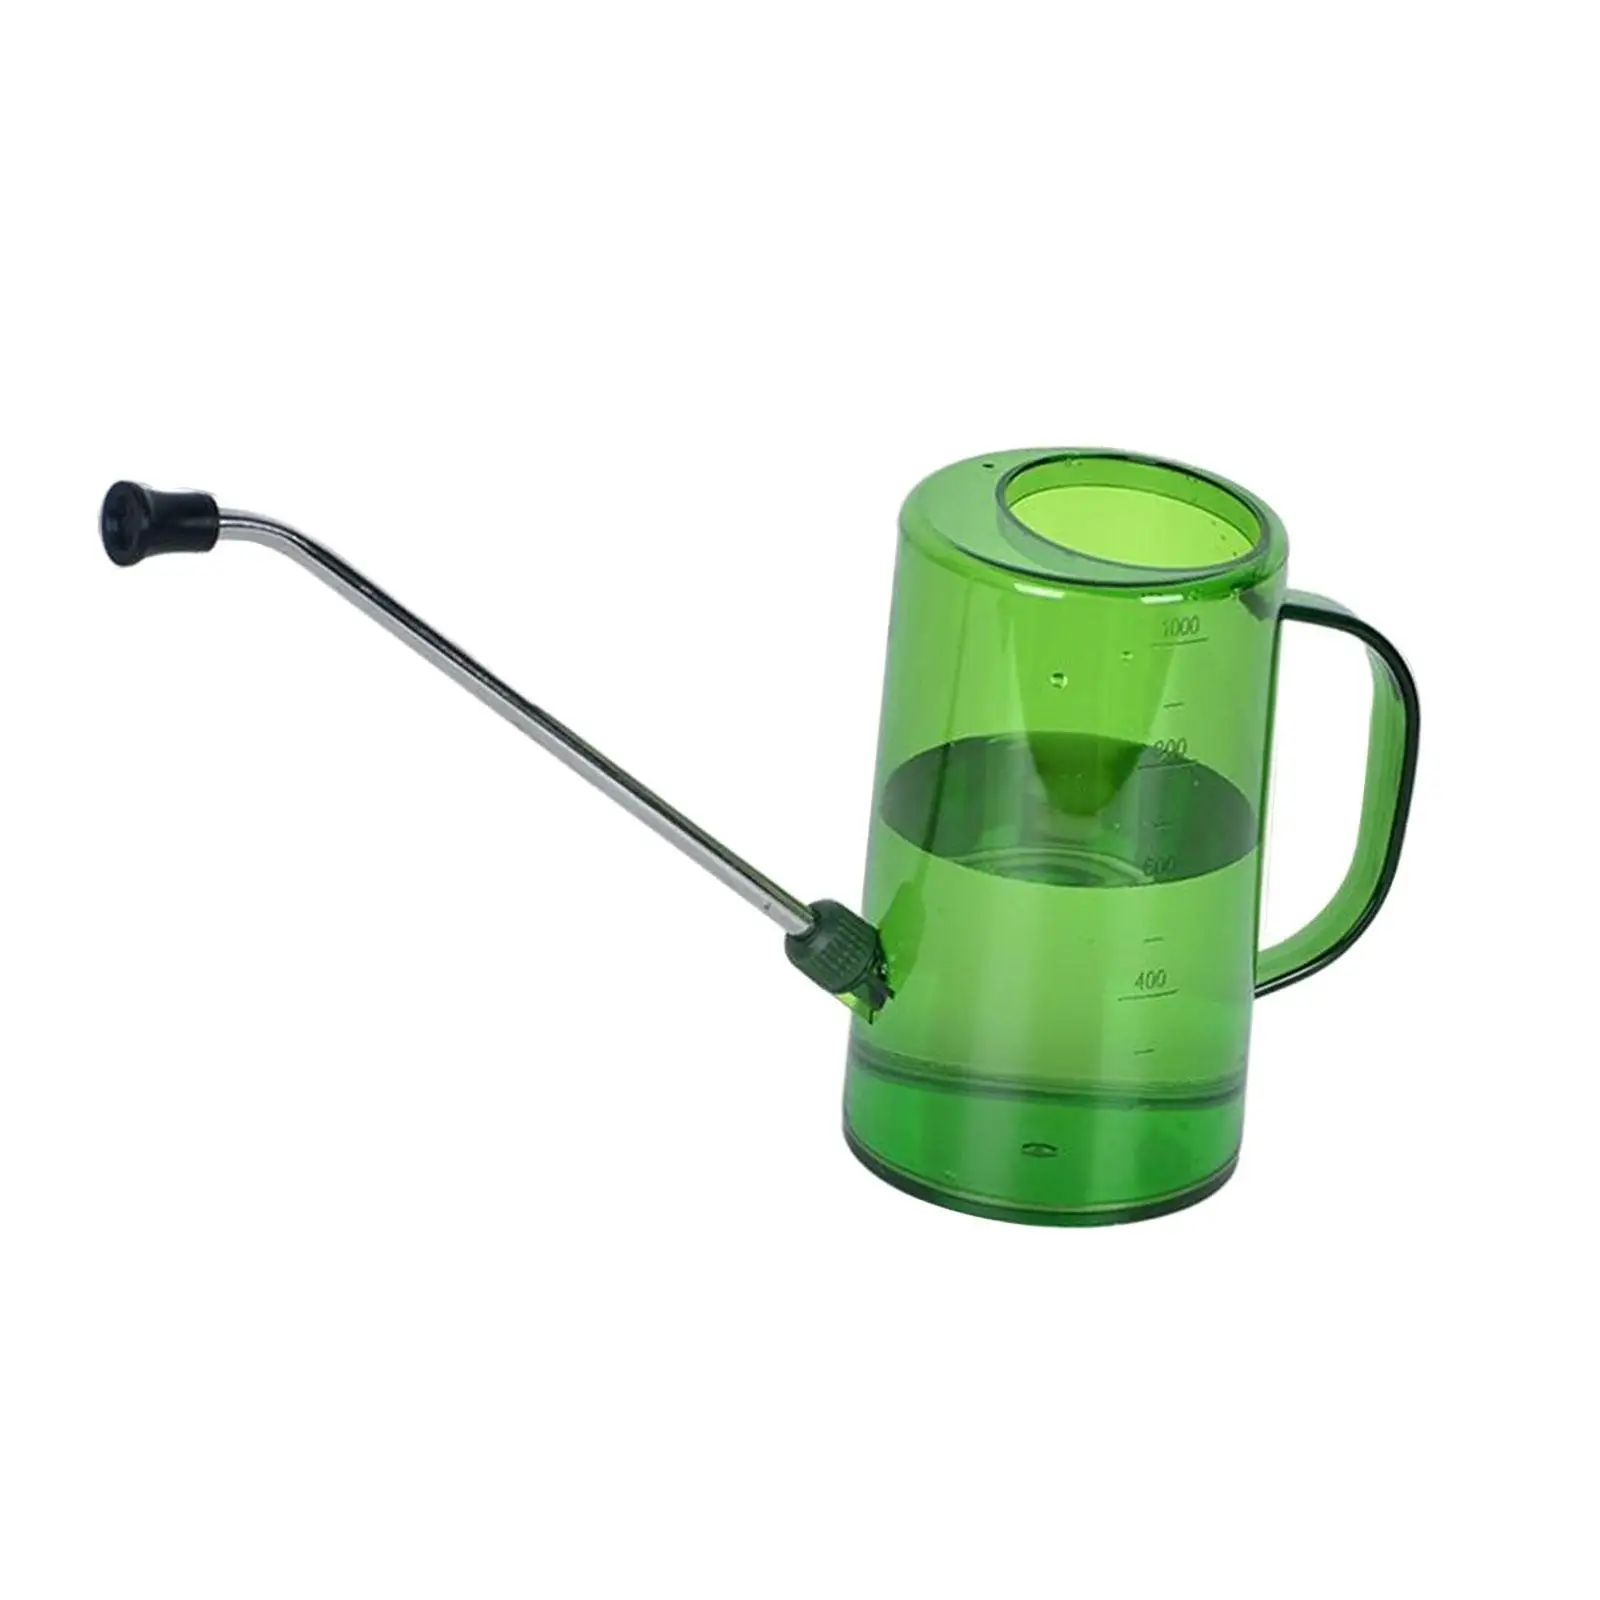 1000ml Long Spout Watering Pot with Detachable Spray Head Small Watering Can for Outdoor Garden Lawn Yard Flowers